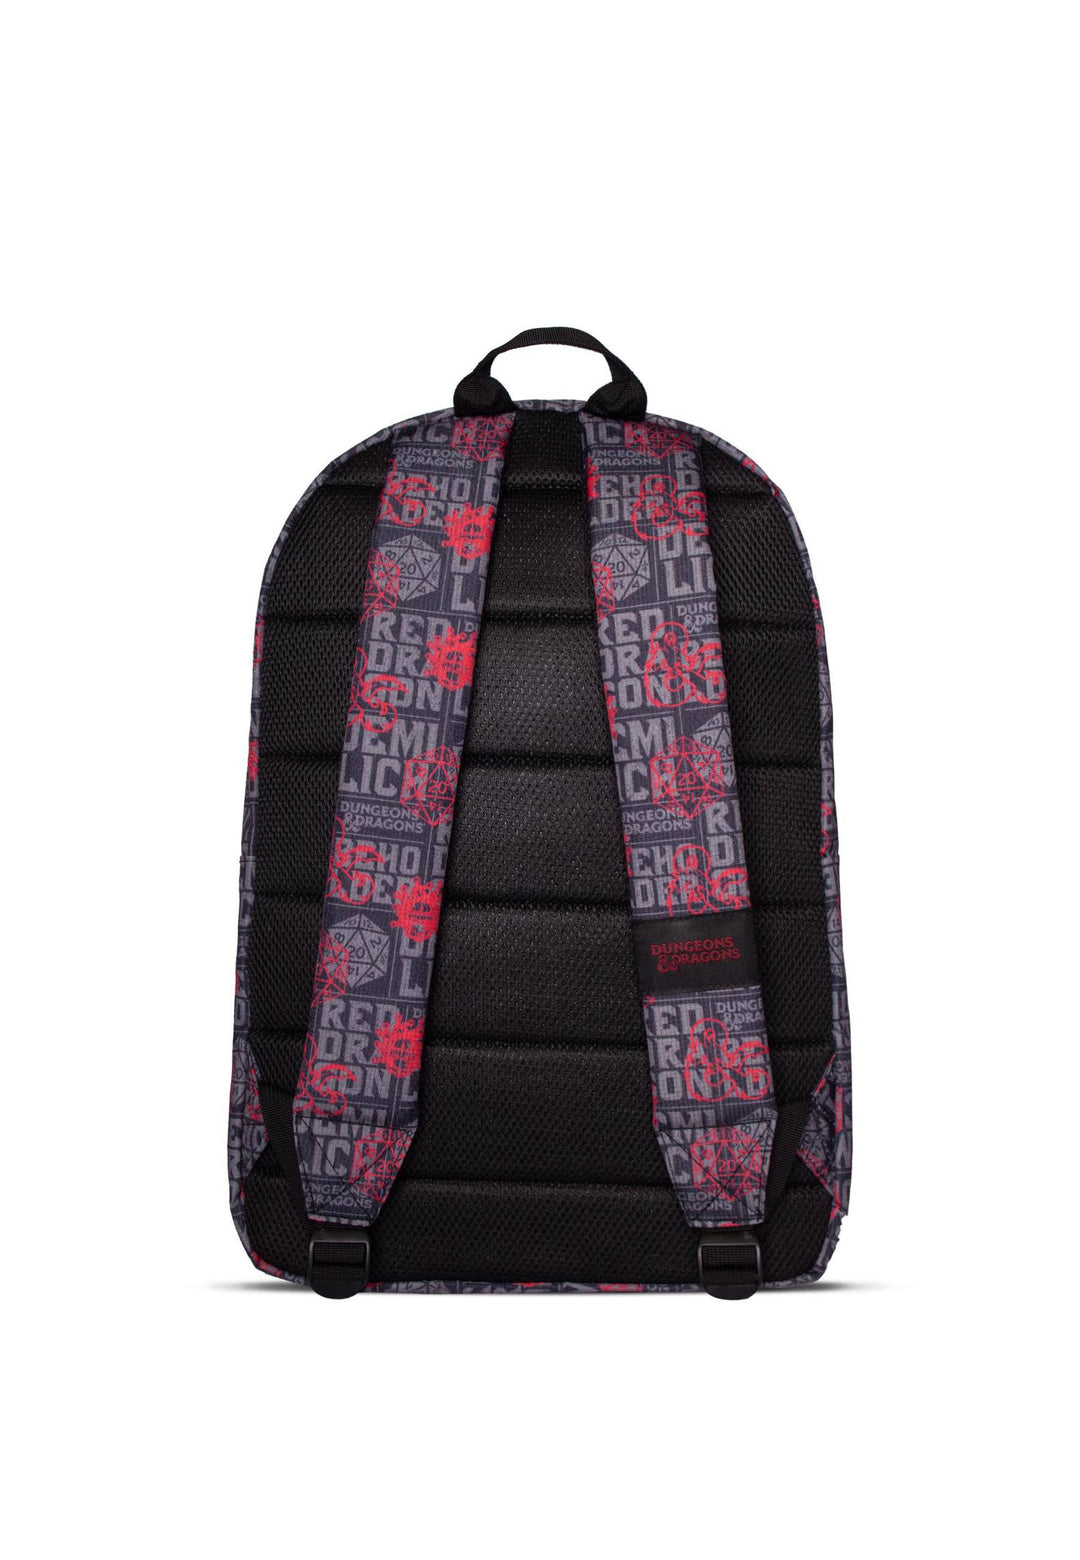 Official Dungeons & Dragons Backpack